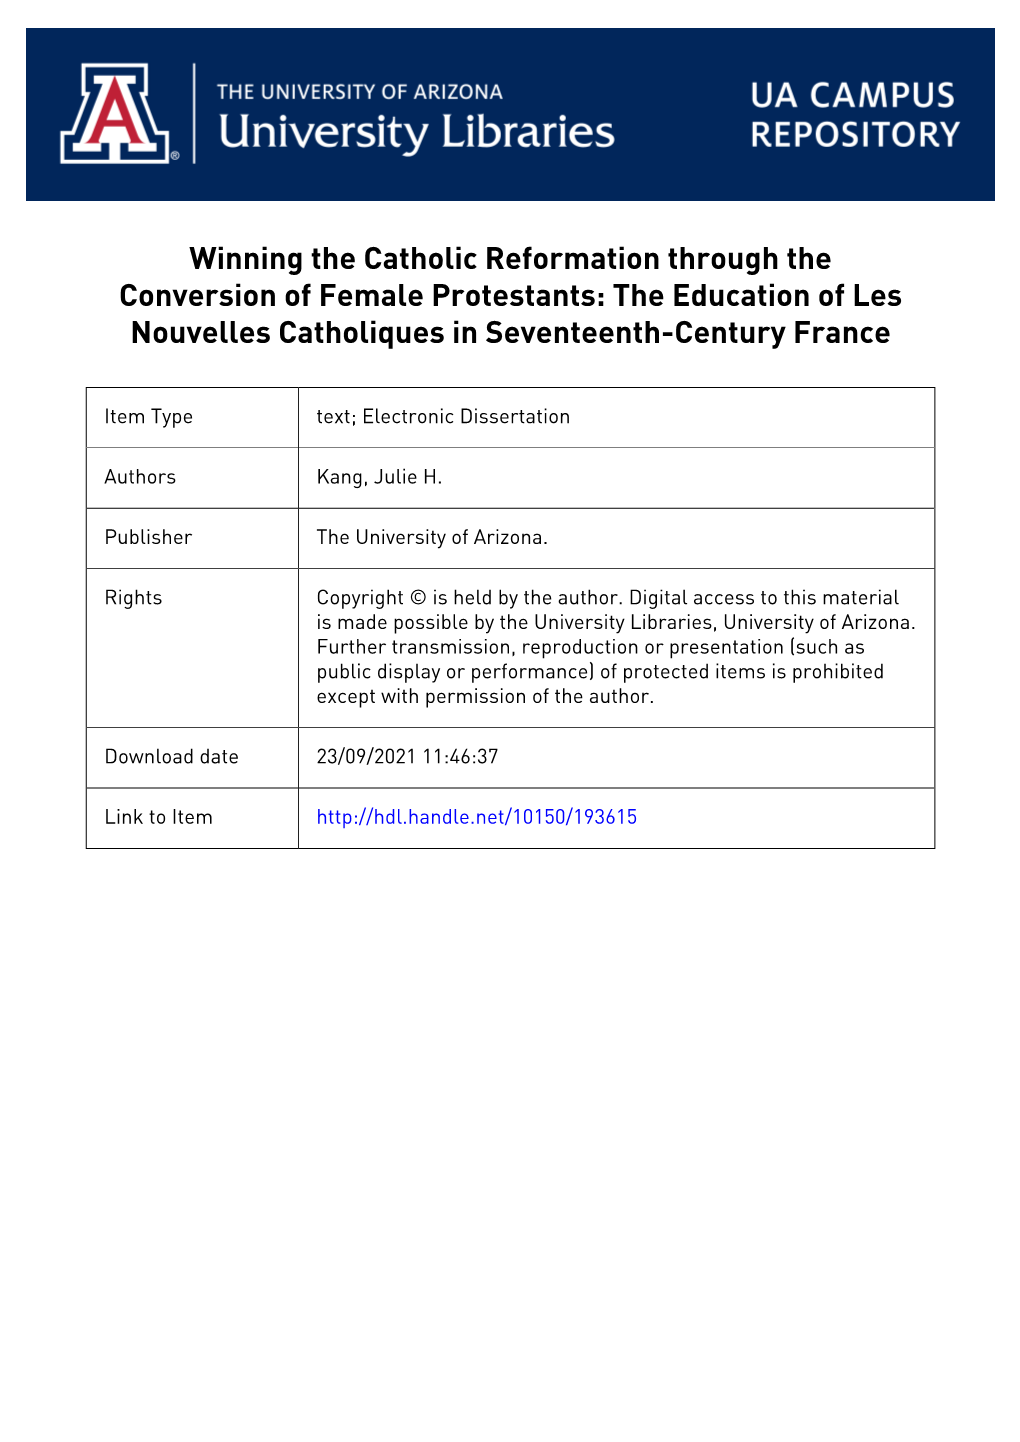 Winning the Catholic Reformation Through the Conversion of Female Protestants: the Education of Les Nouvelles Catholiques in Seventeenth-Century France